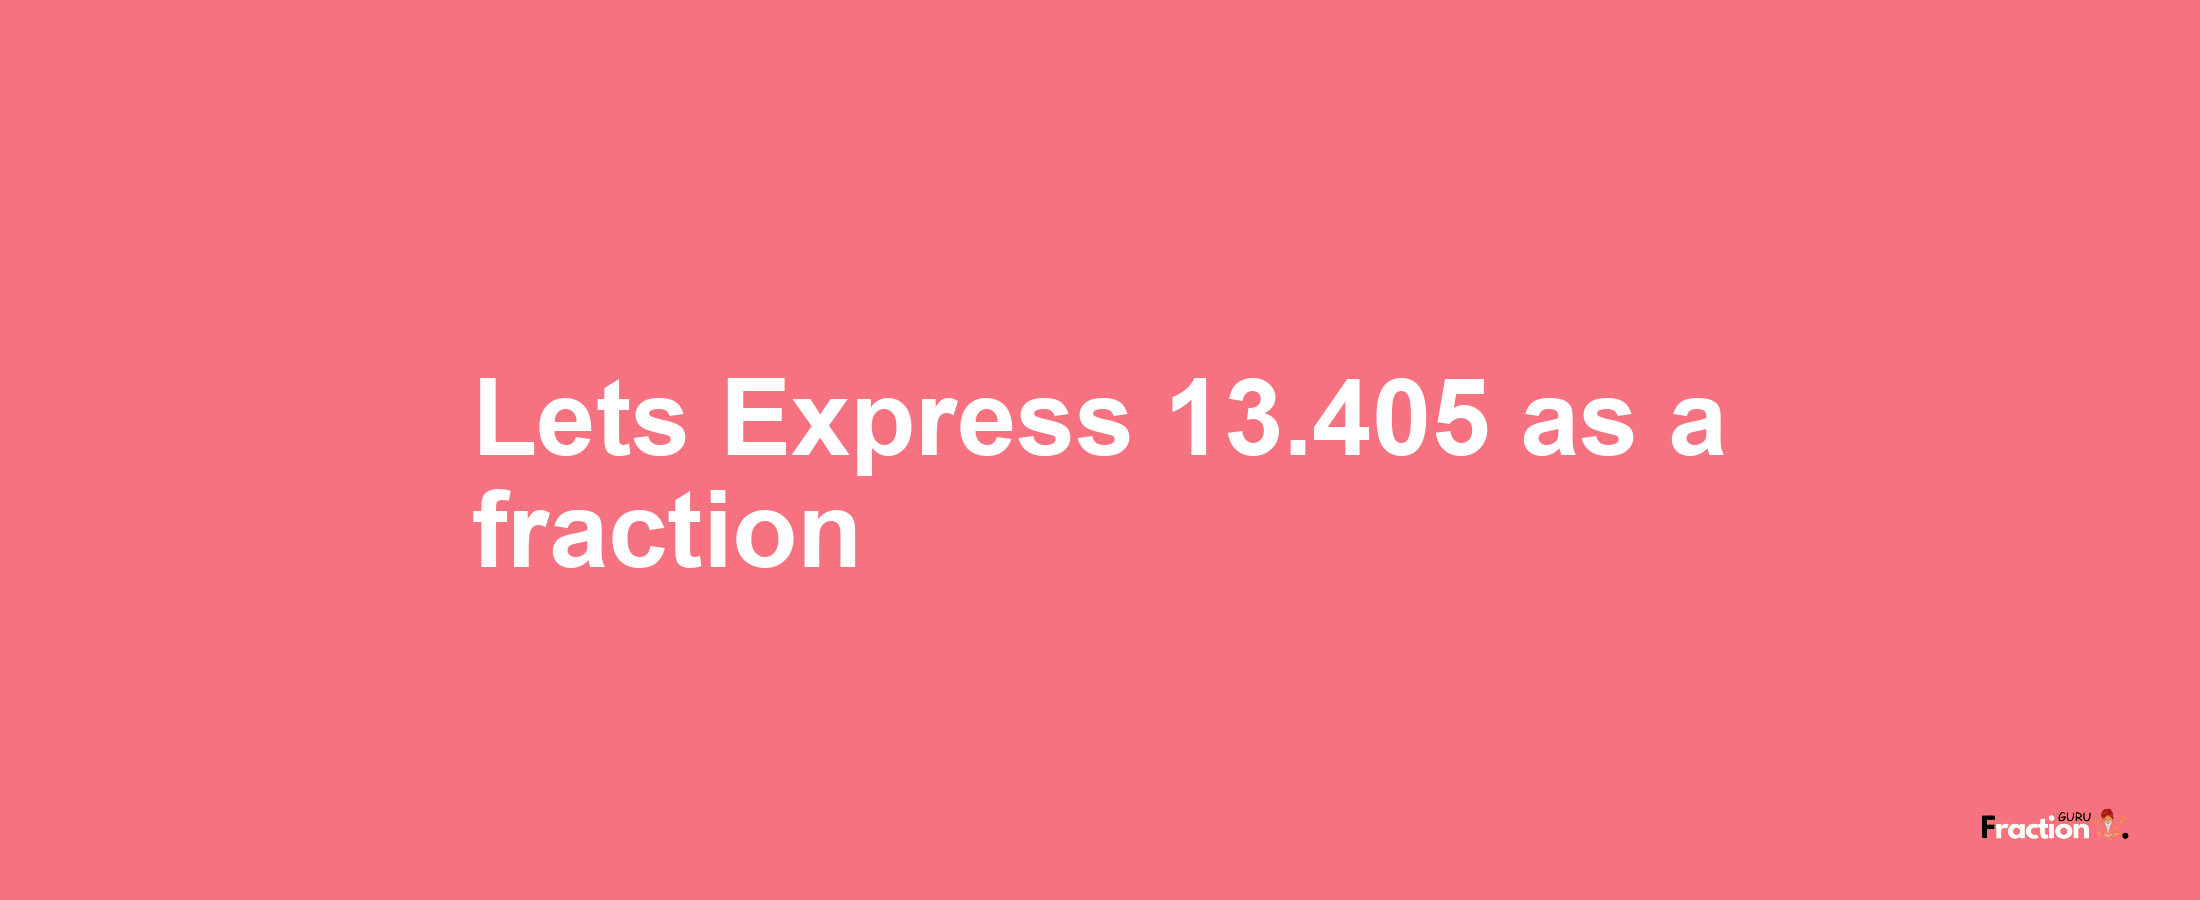 Lets Express 13.405 as afraction